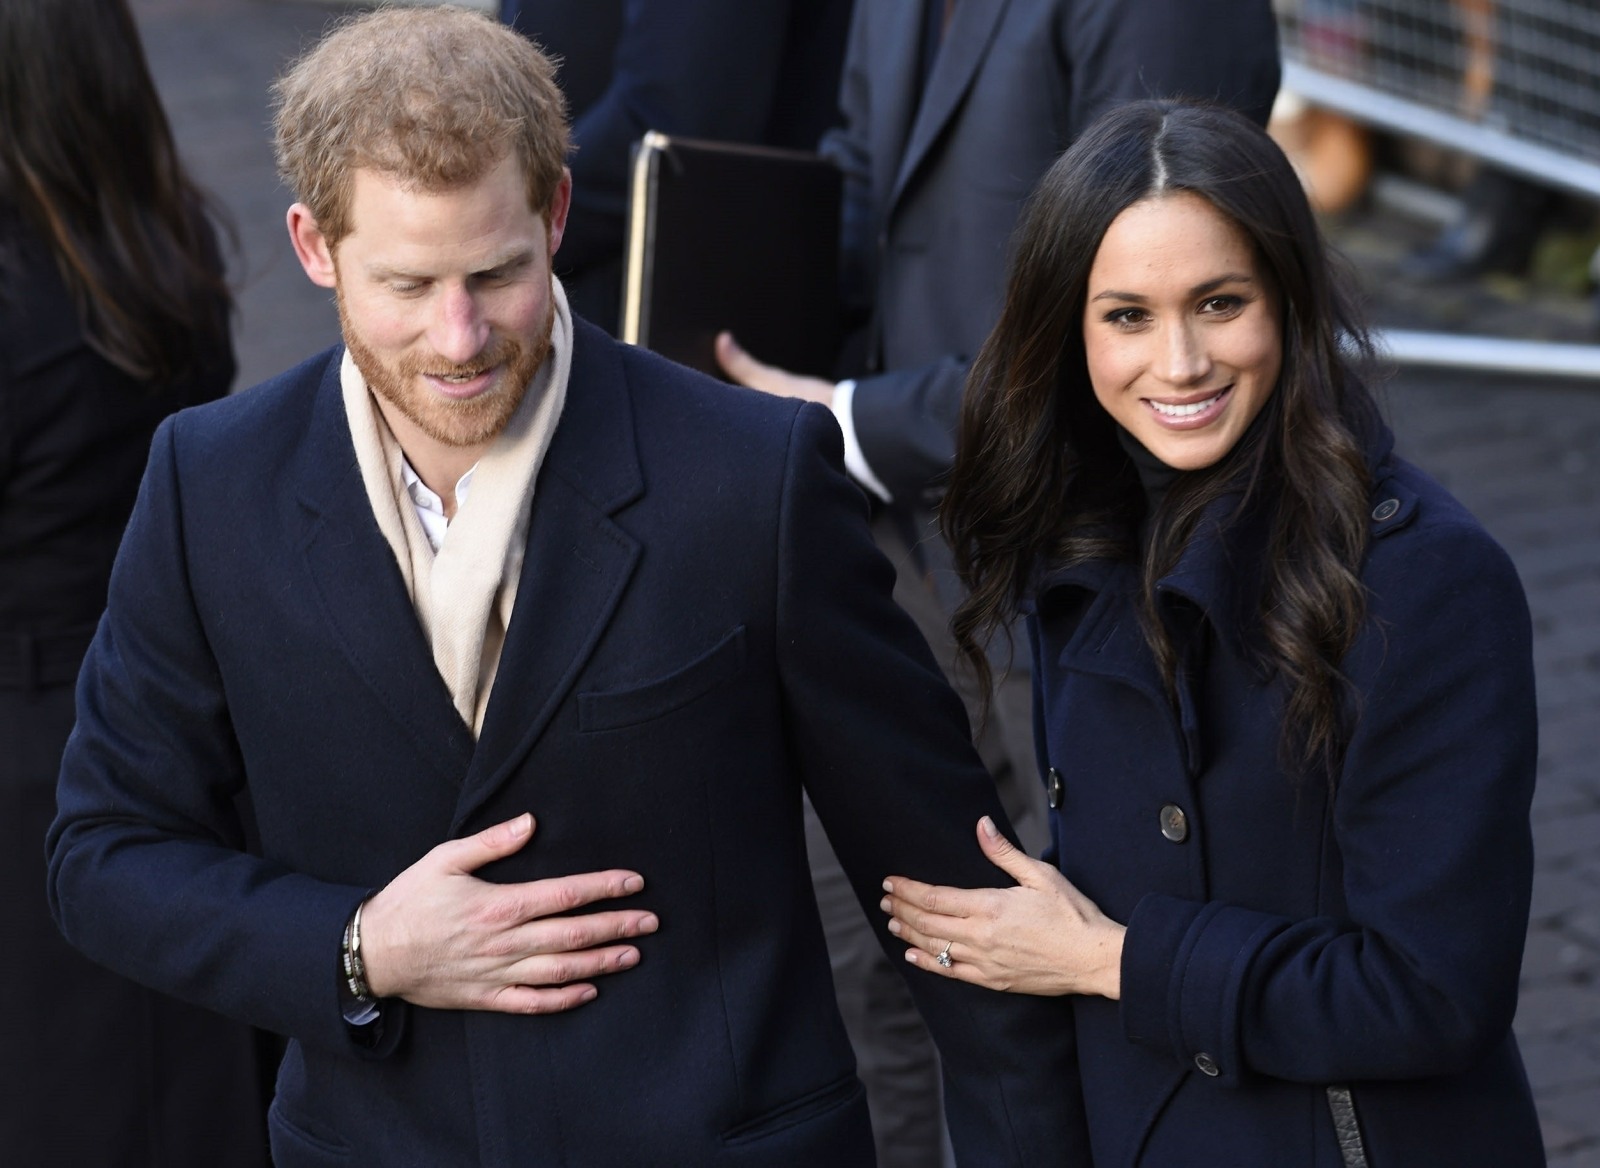 Prince Harry and Meghan Markle greet fans while visiting Nottingham